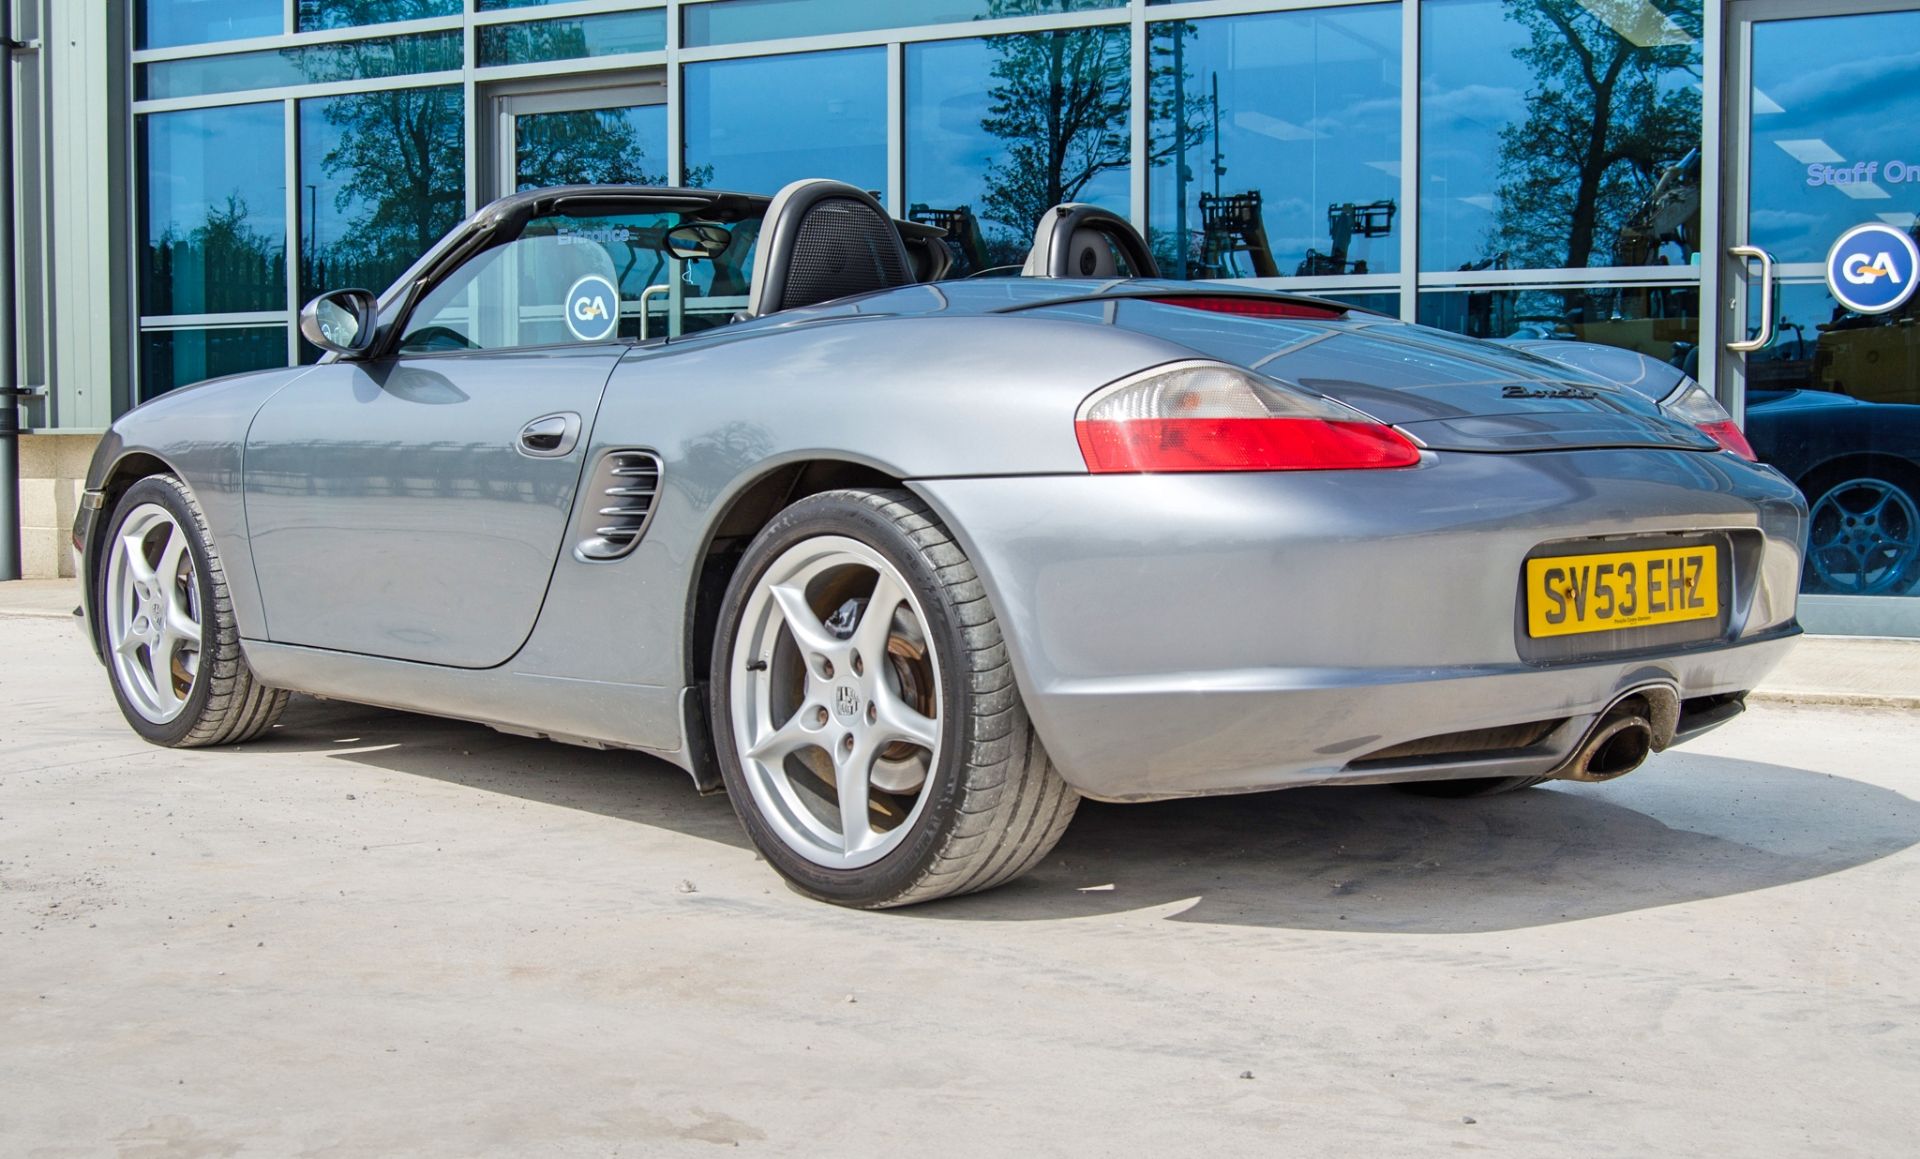 2003 Porsche Boxster 2.7 5 speed manual convertible roadster - Image 7 of 50